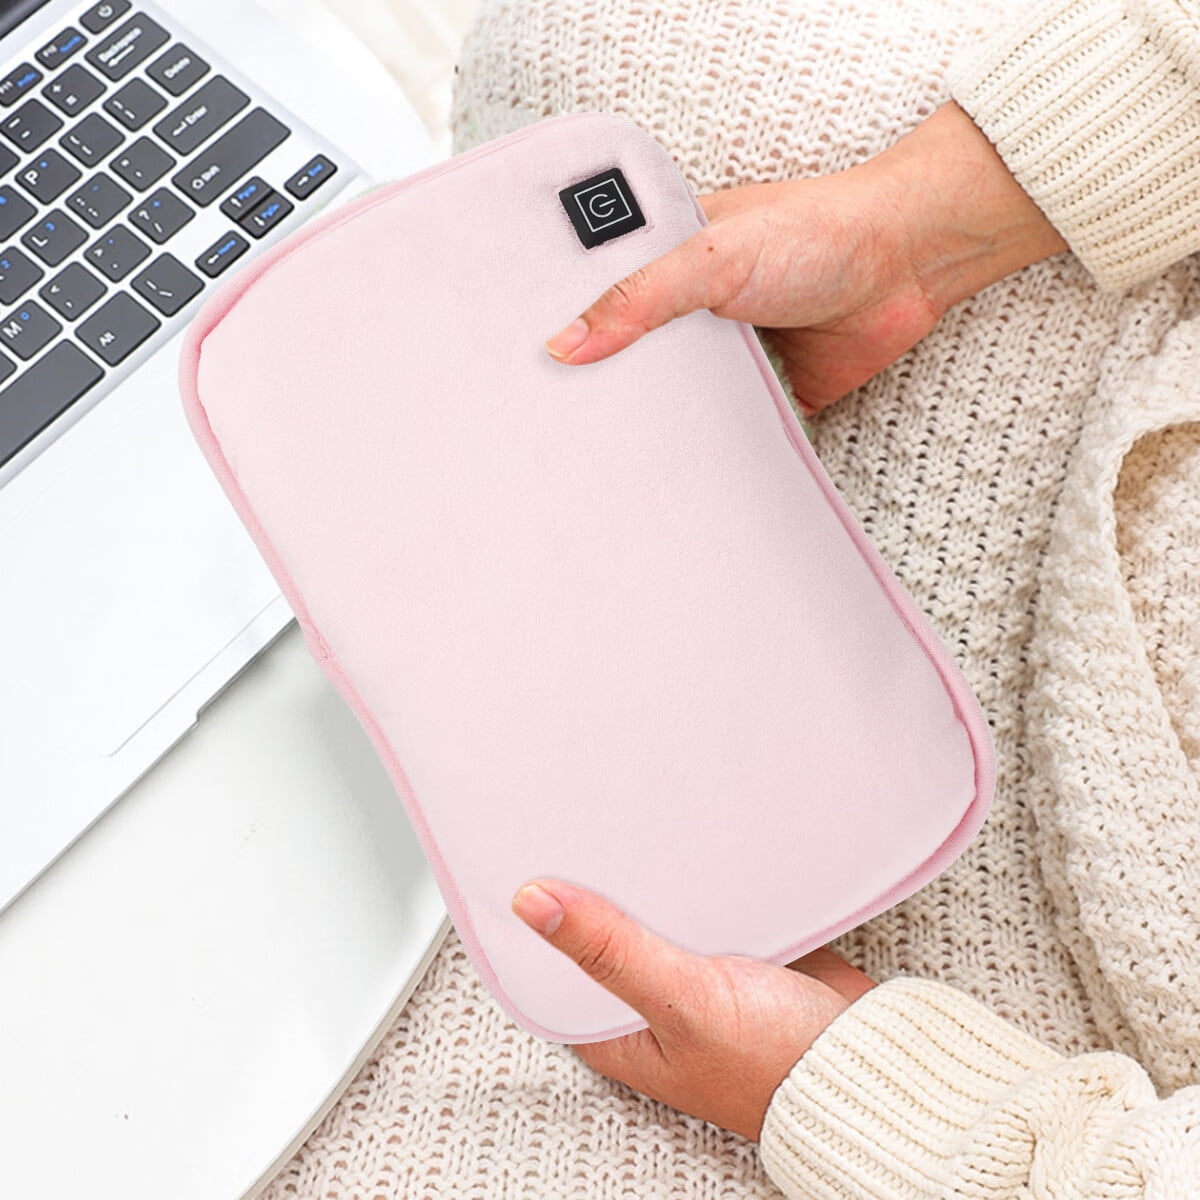  Rechargeable Hot Water Bottle Portable Electric USB Hot Water  Bag with Plush Cover Winter Hand & Feet Warmer Hot Water Pouch for  Menstrual Cramps or Muscle Aches & Back Pains Xmas